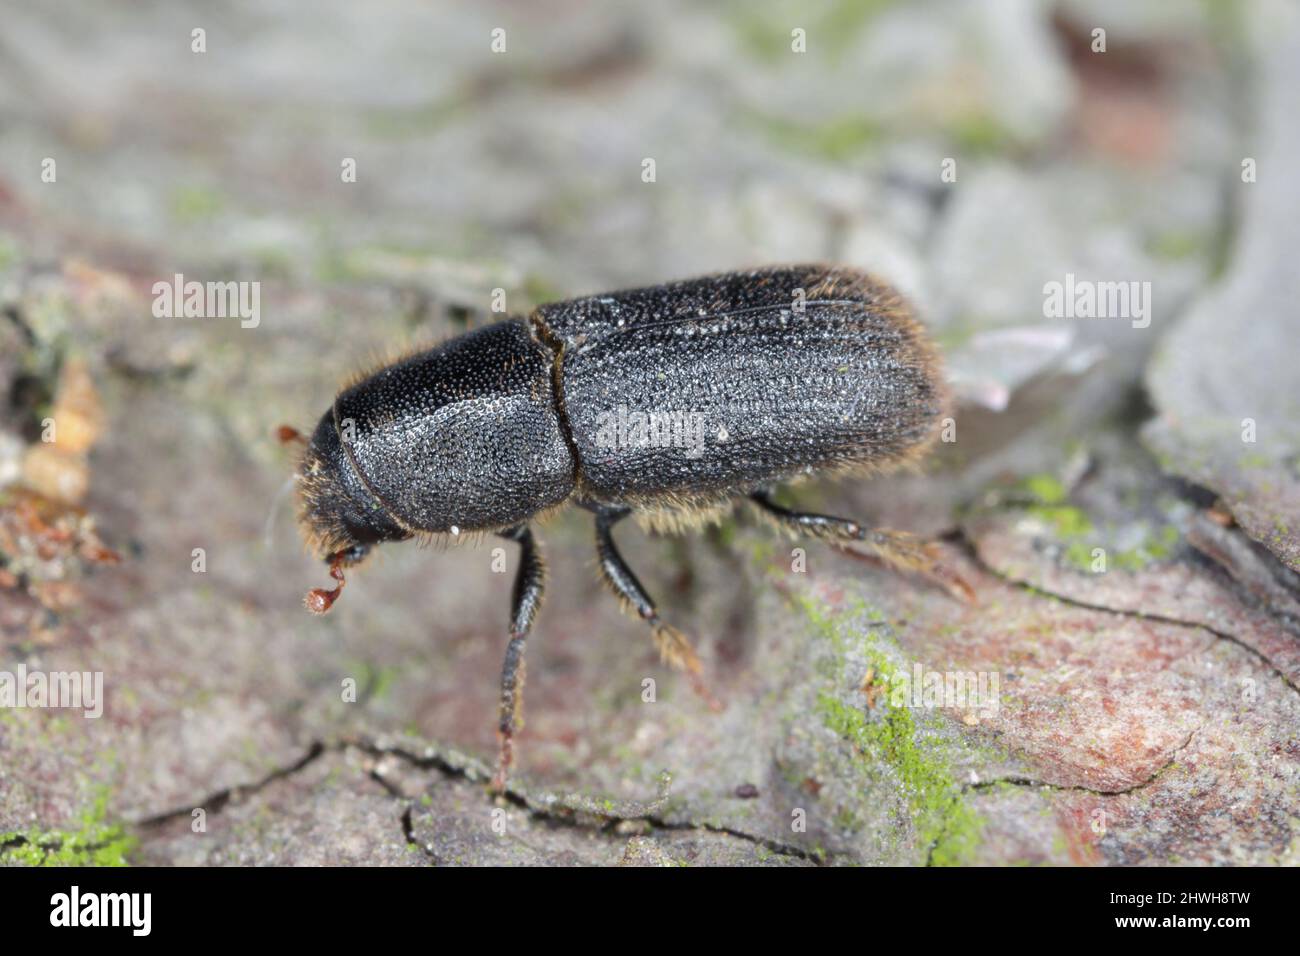 Hylurgus ligniperda - common bark beetle damaged pines in the forests. Beetle on the bark of a tree. Stock Photo